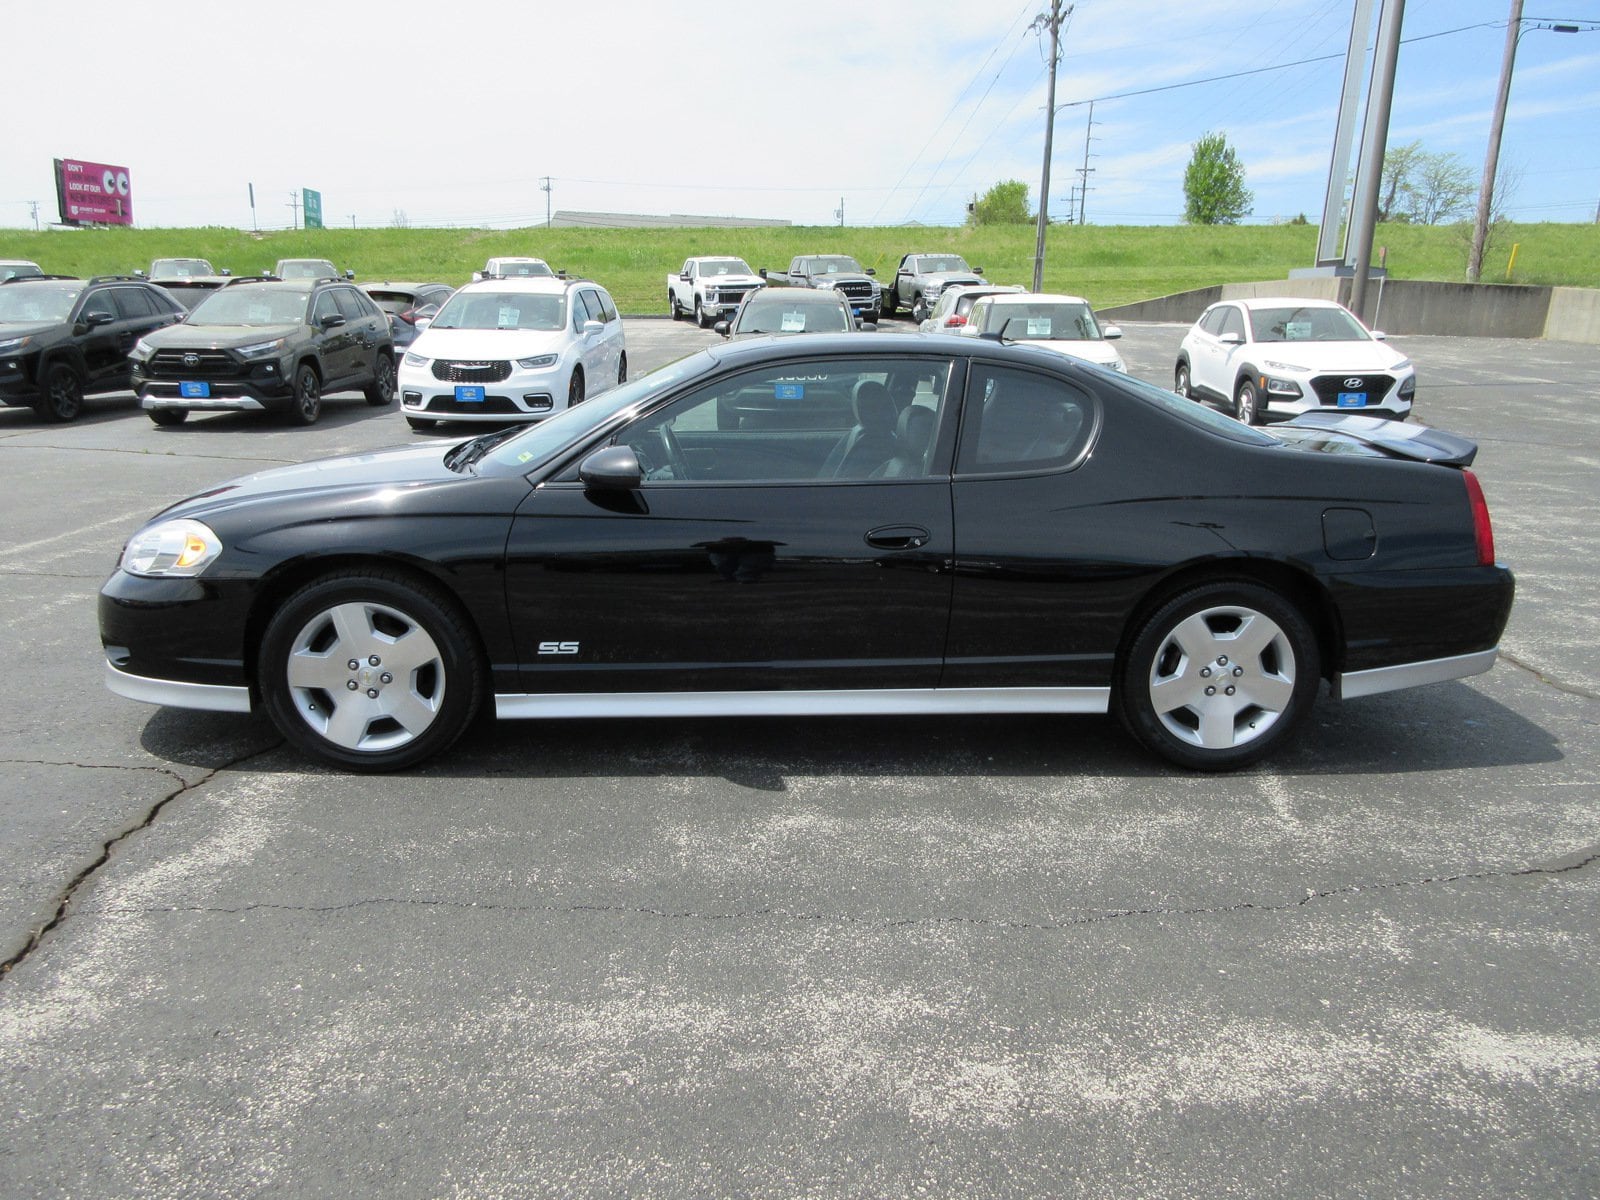 Used 2007 Chevrolet Monte Carlo SS with VIN 2G1WL15C079347735 for sale in Ozark, MO